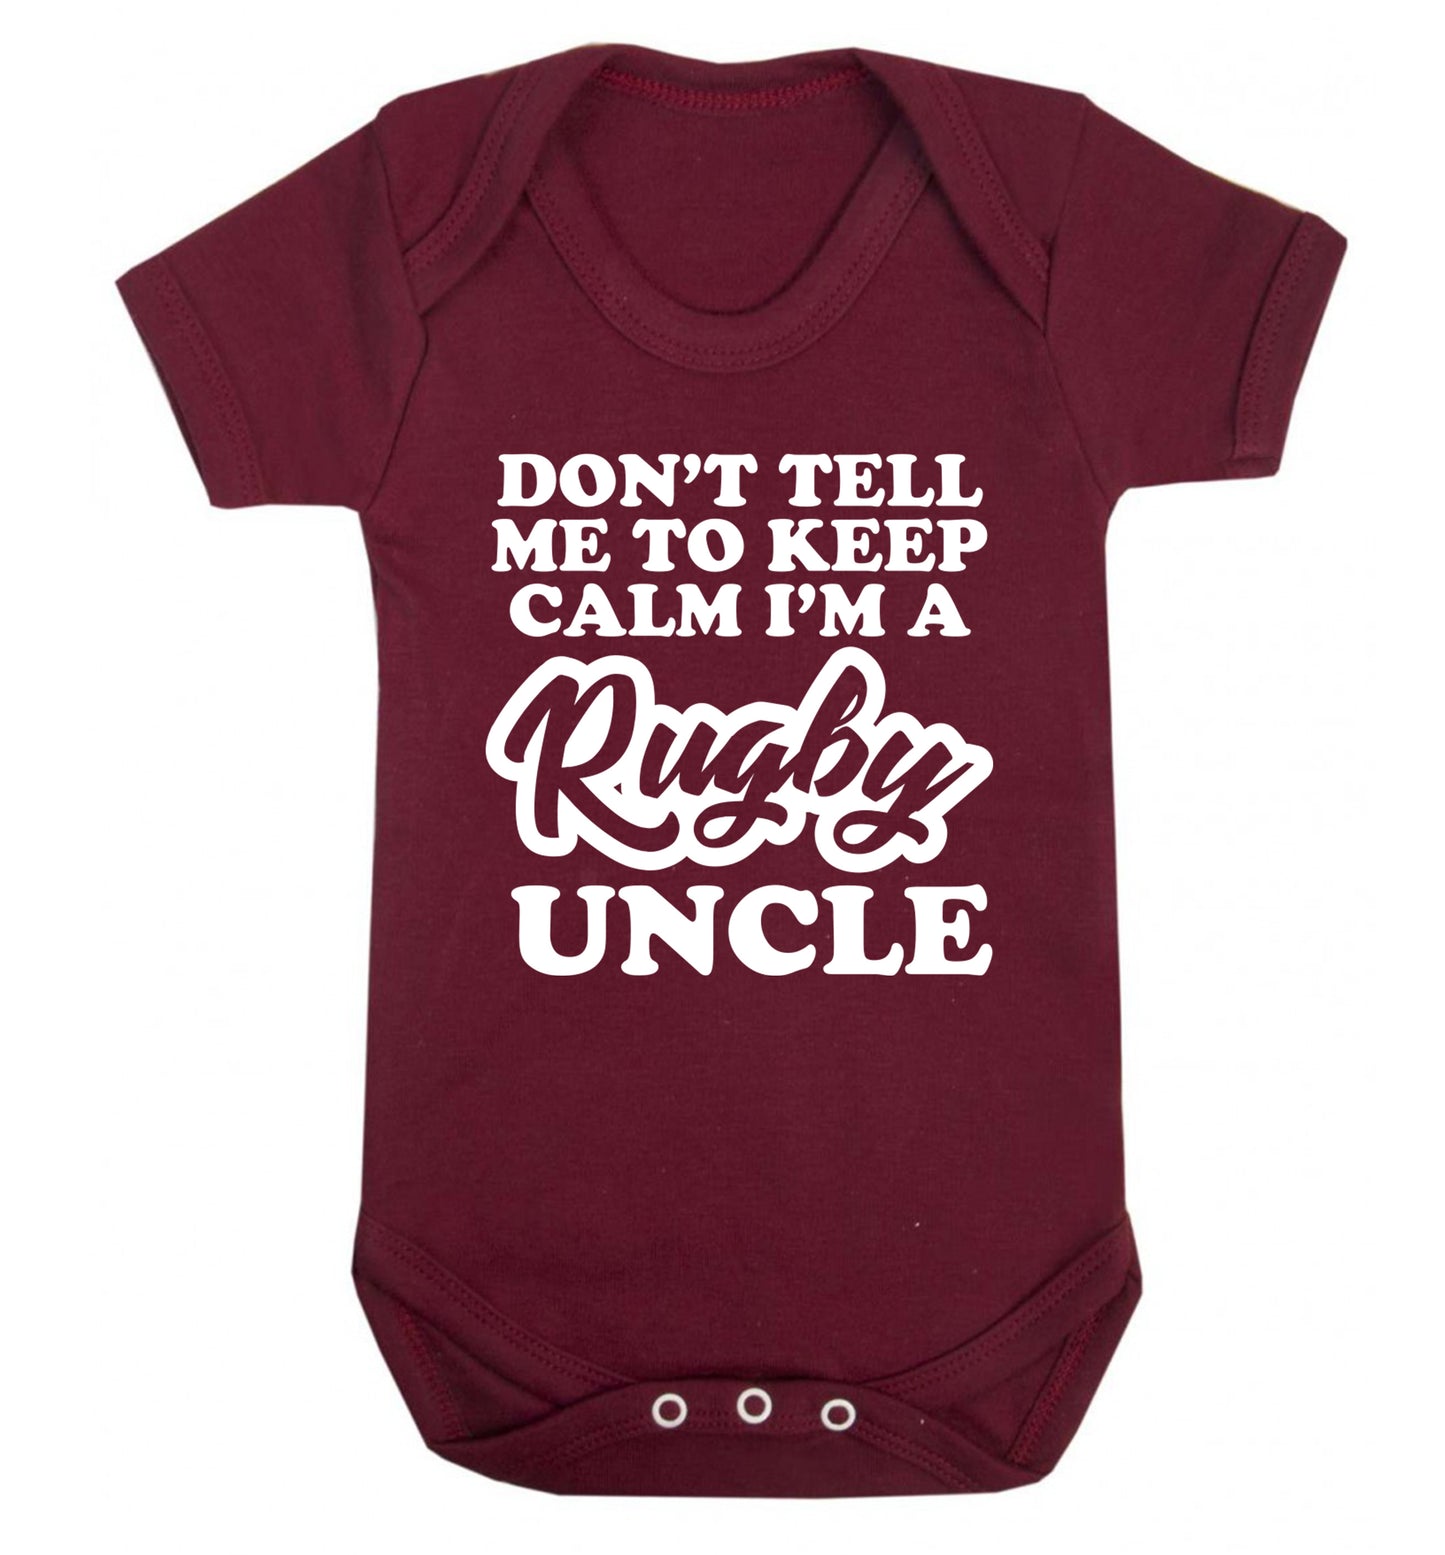 Don't tell me to keep calm I'm a rugby uncle Baby Vest maroon 18-24 months